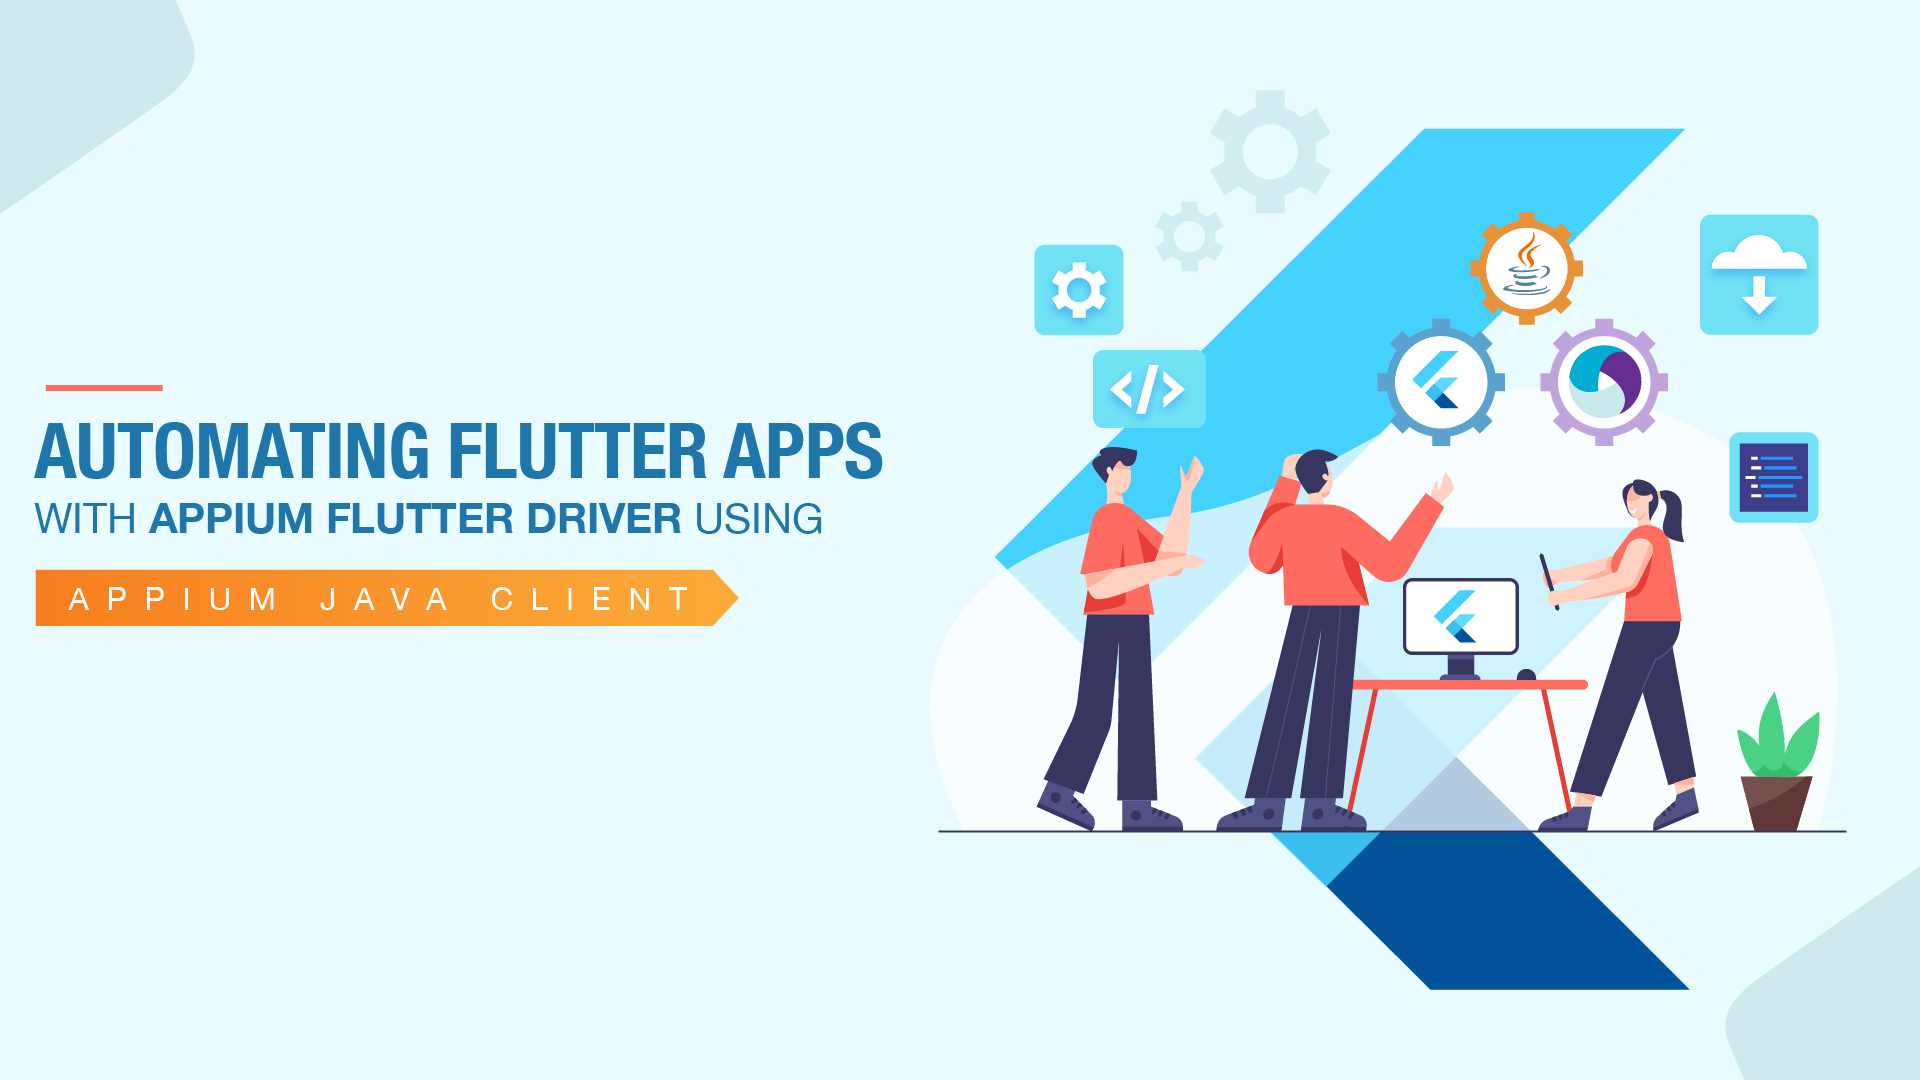 Automating Flutter Apps with Appium Flutter Driver